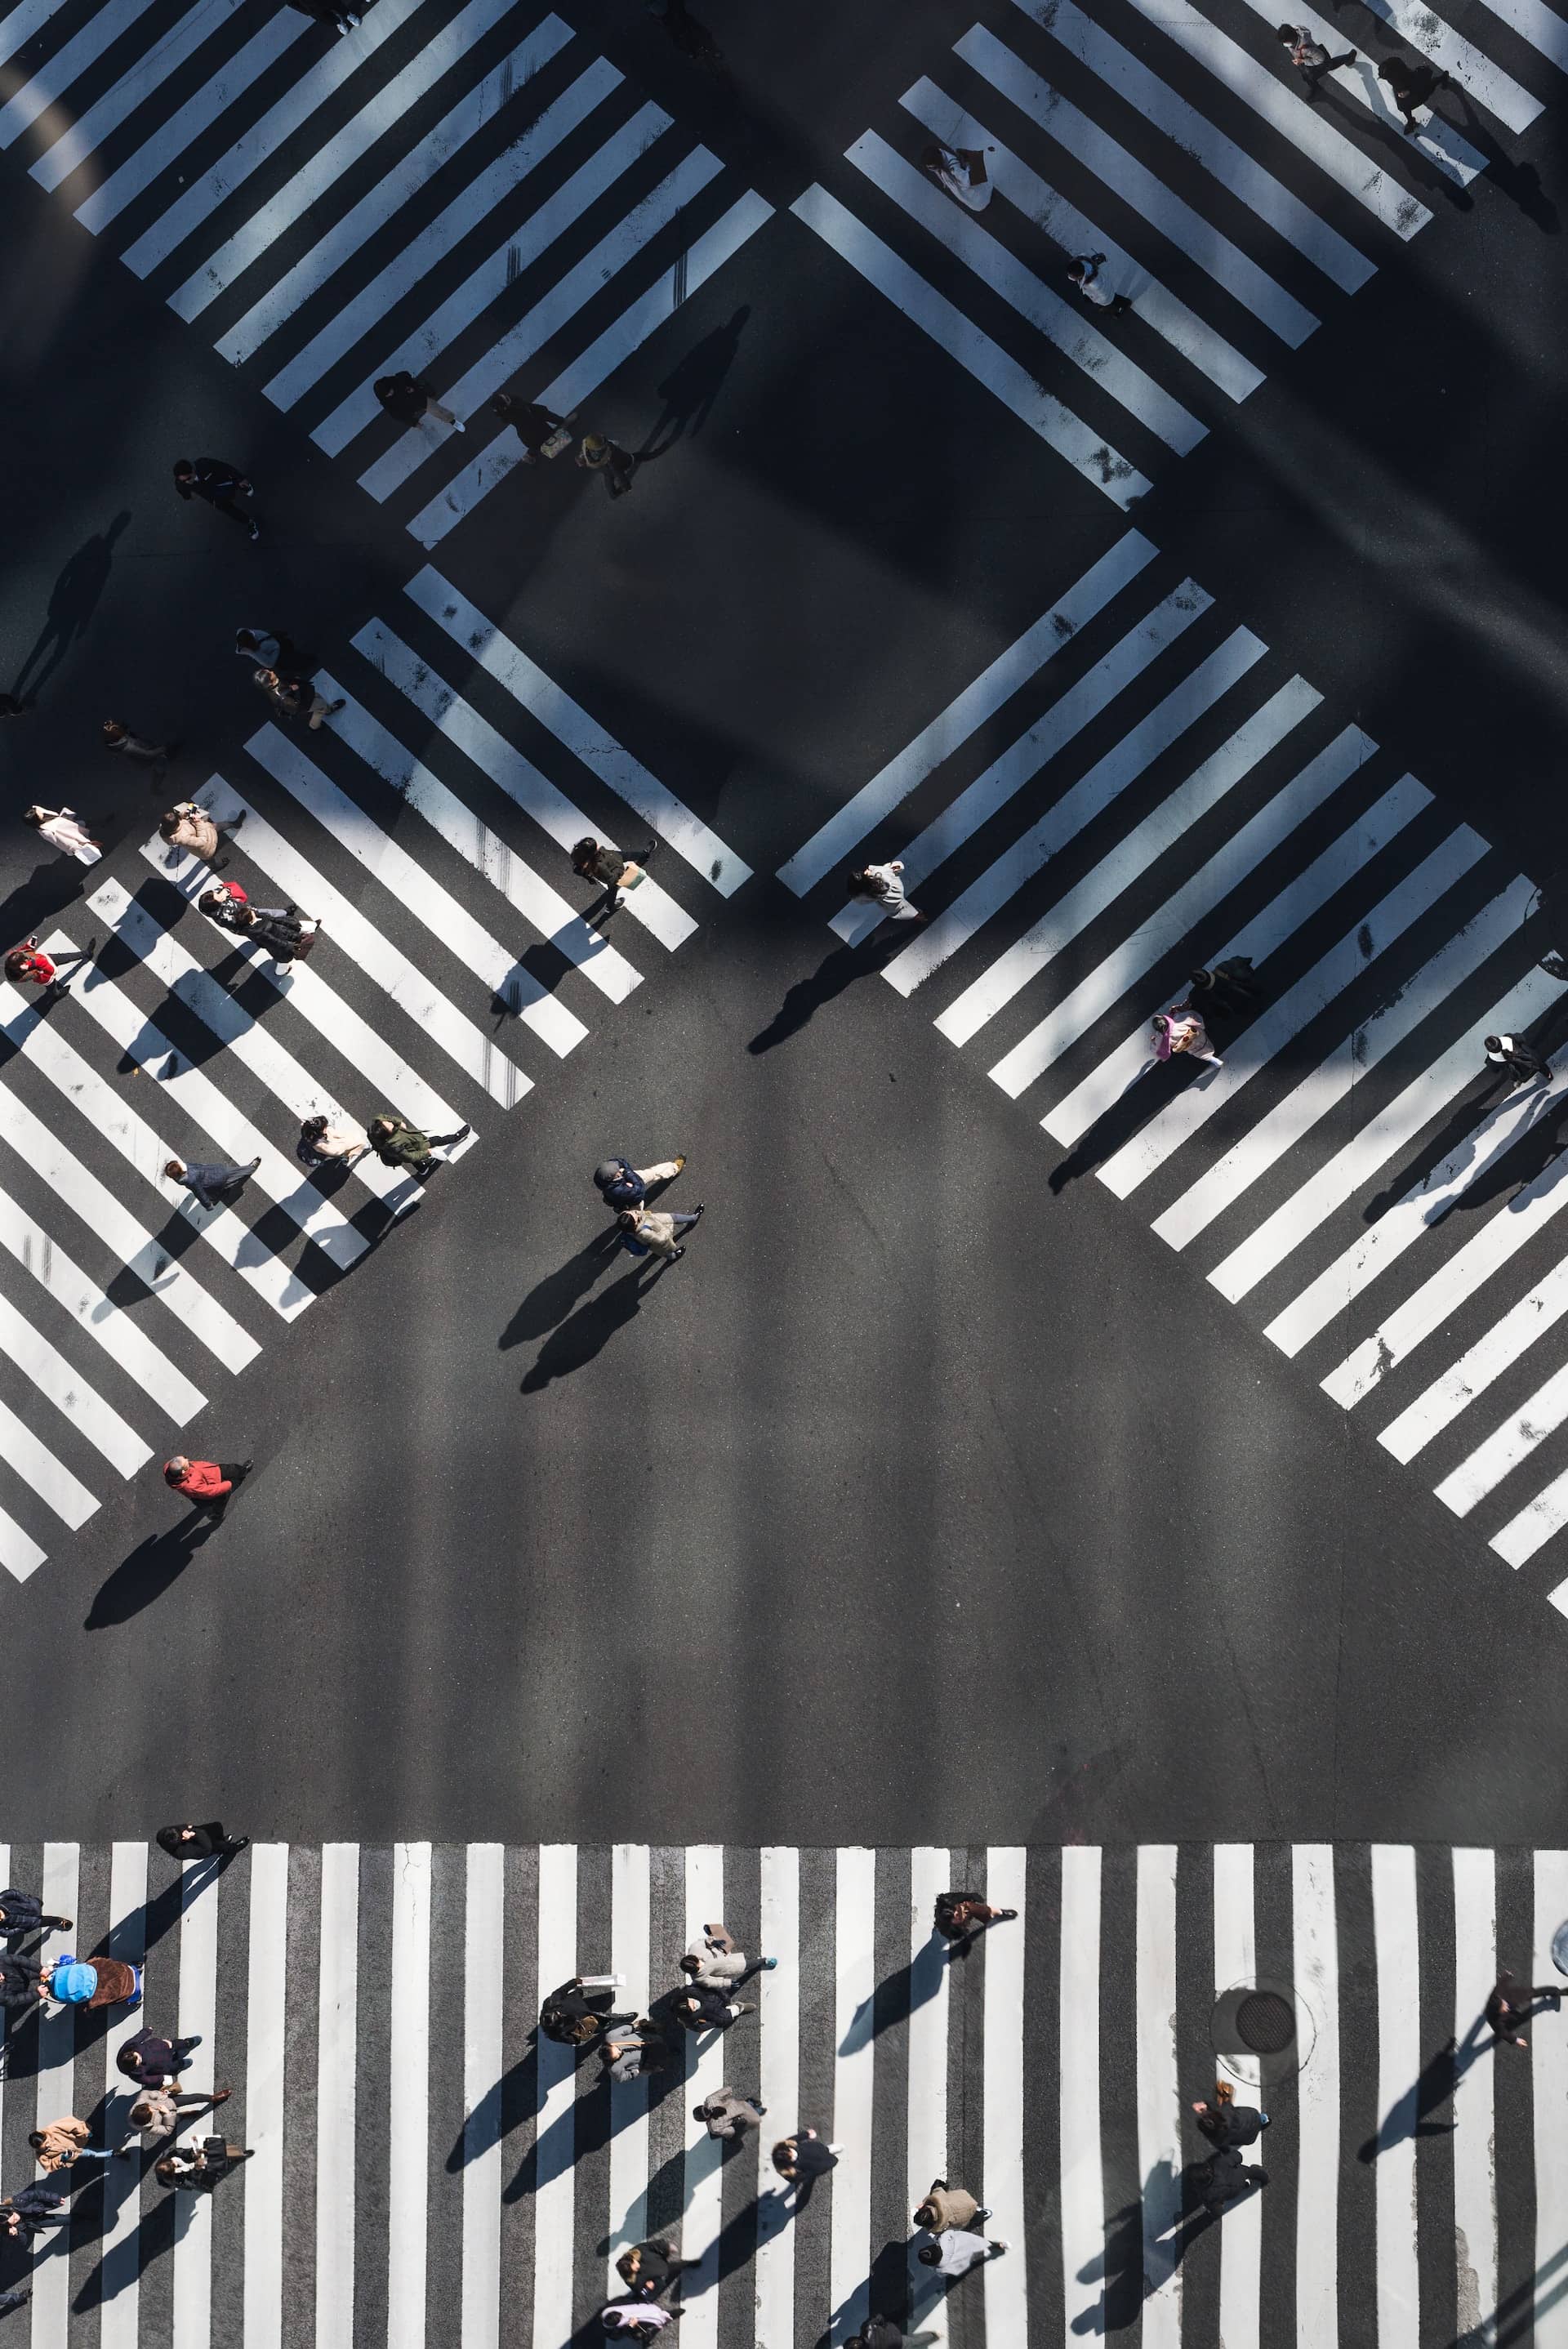 Aerial image of people walking across a busy intersection.